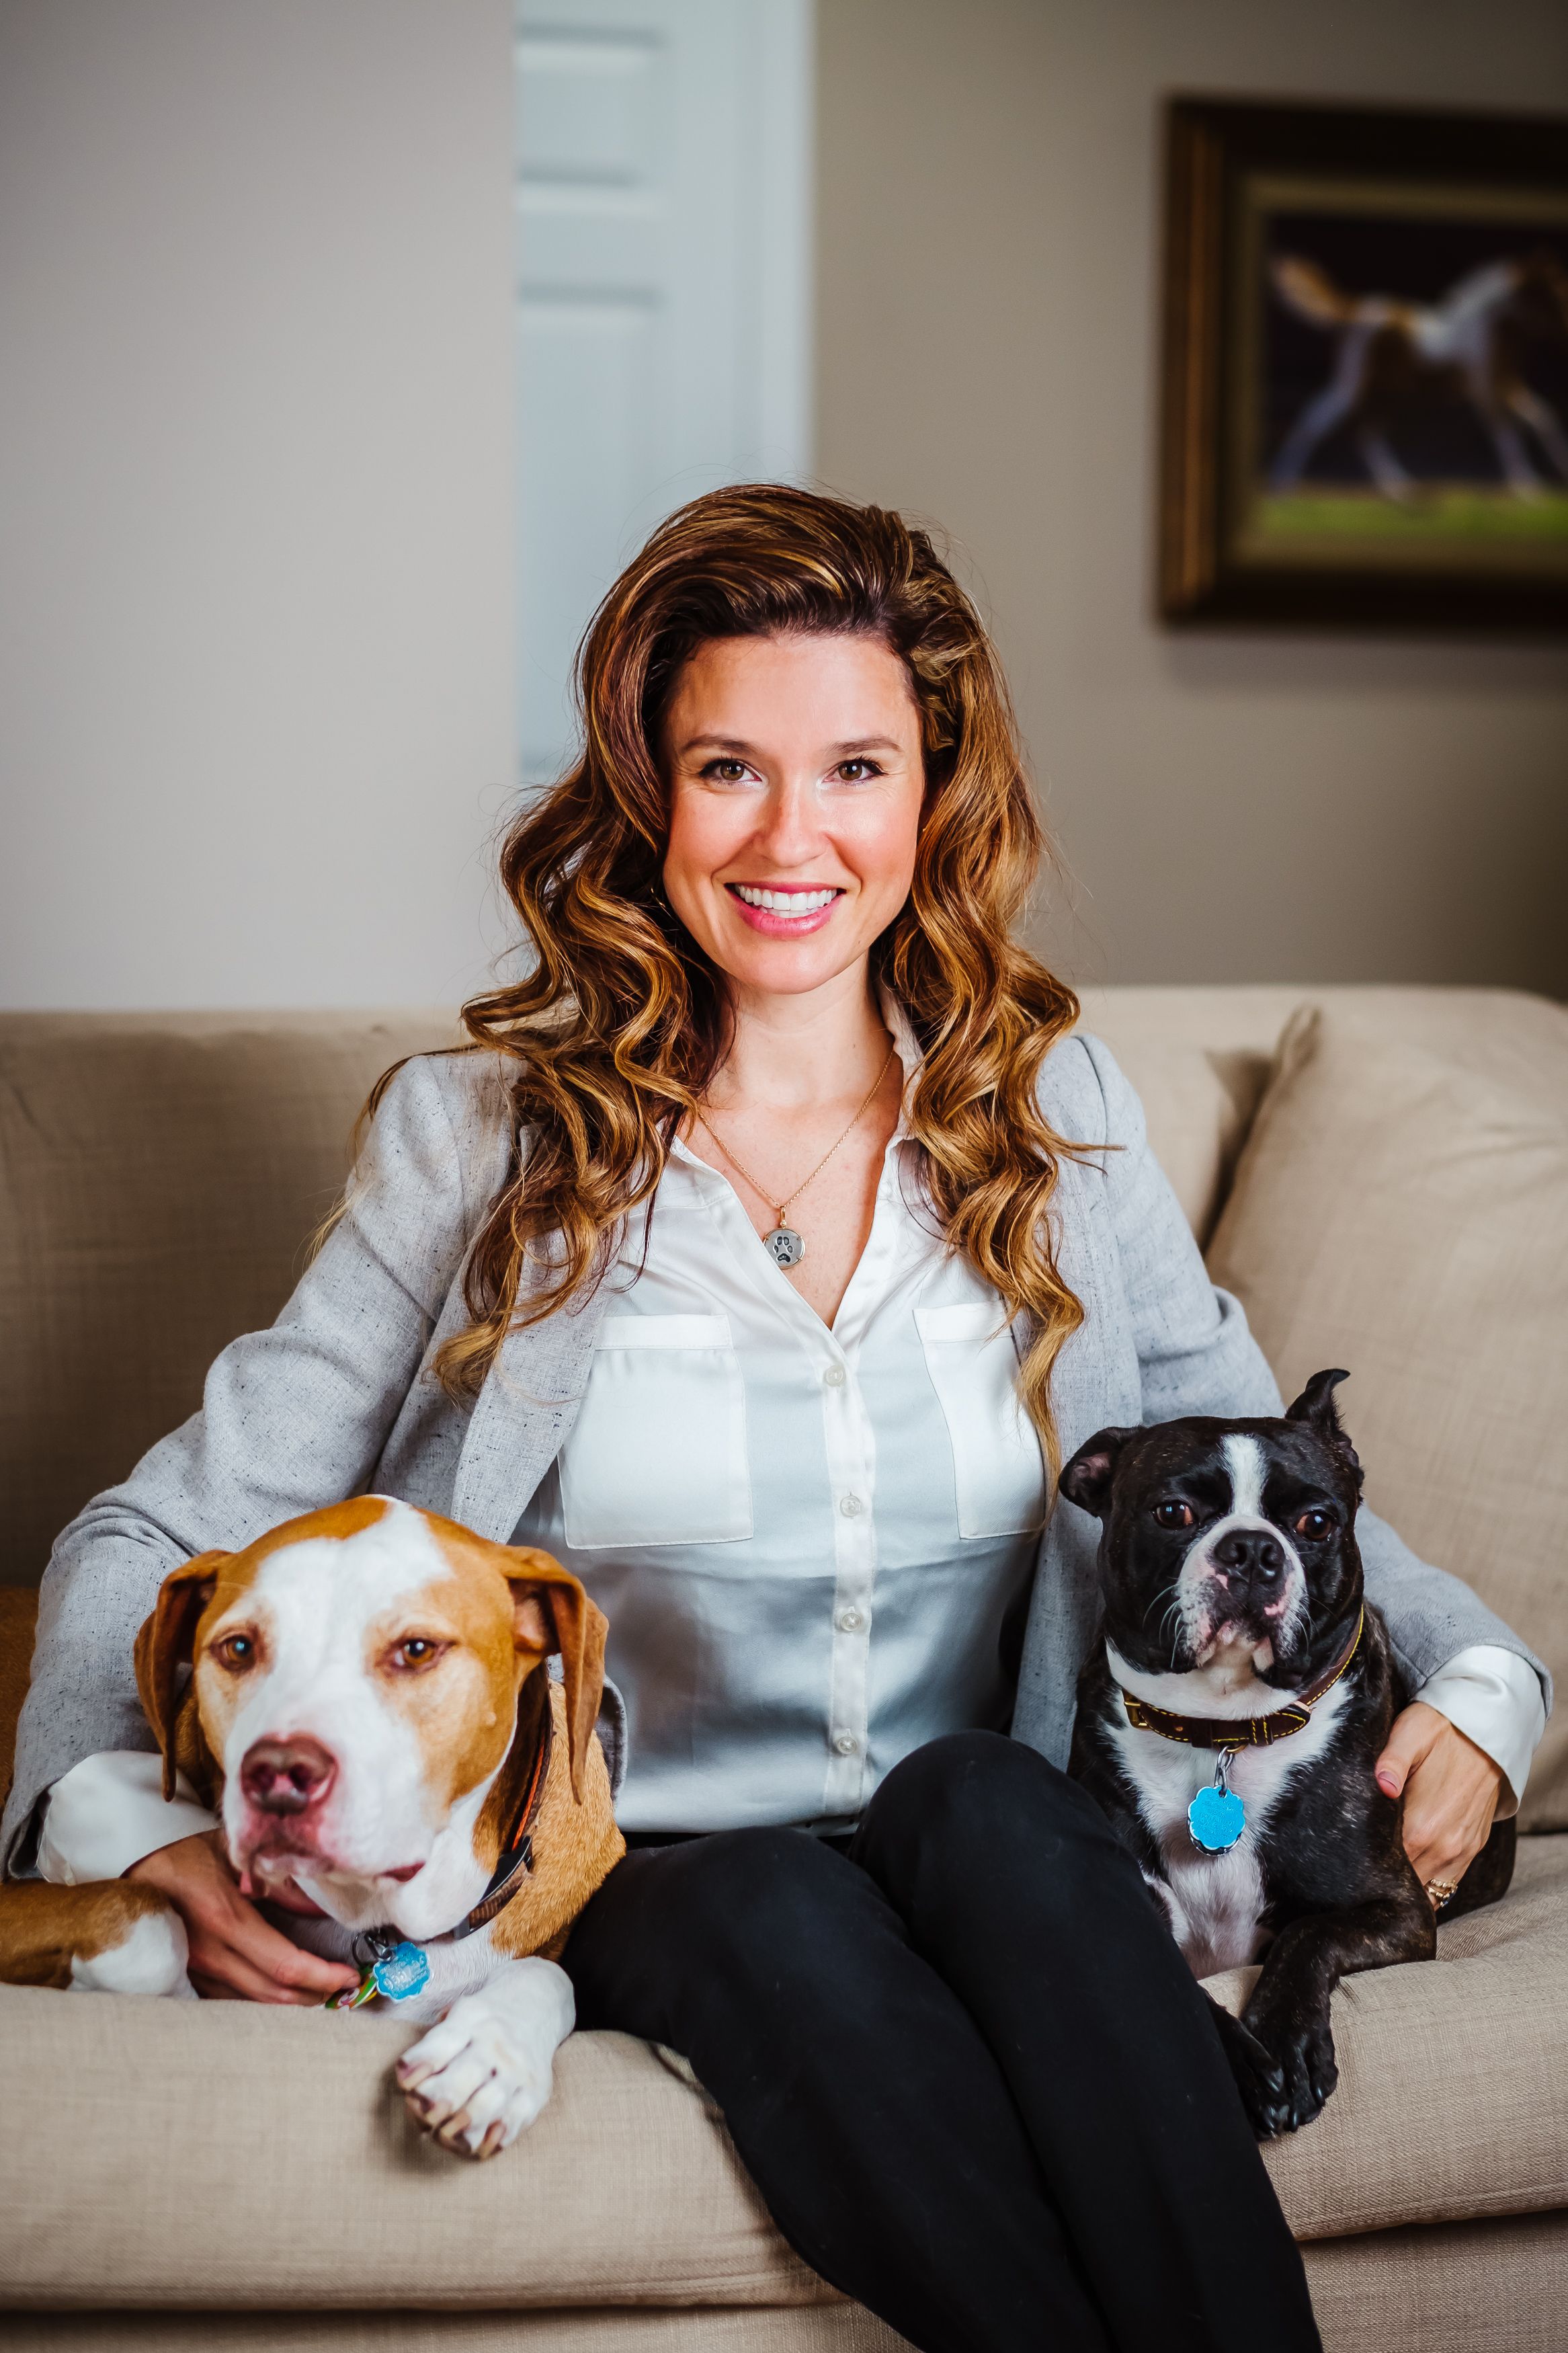 A woman sitting on a couch with two dogs sitting on either side of her.